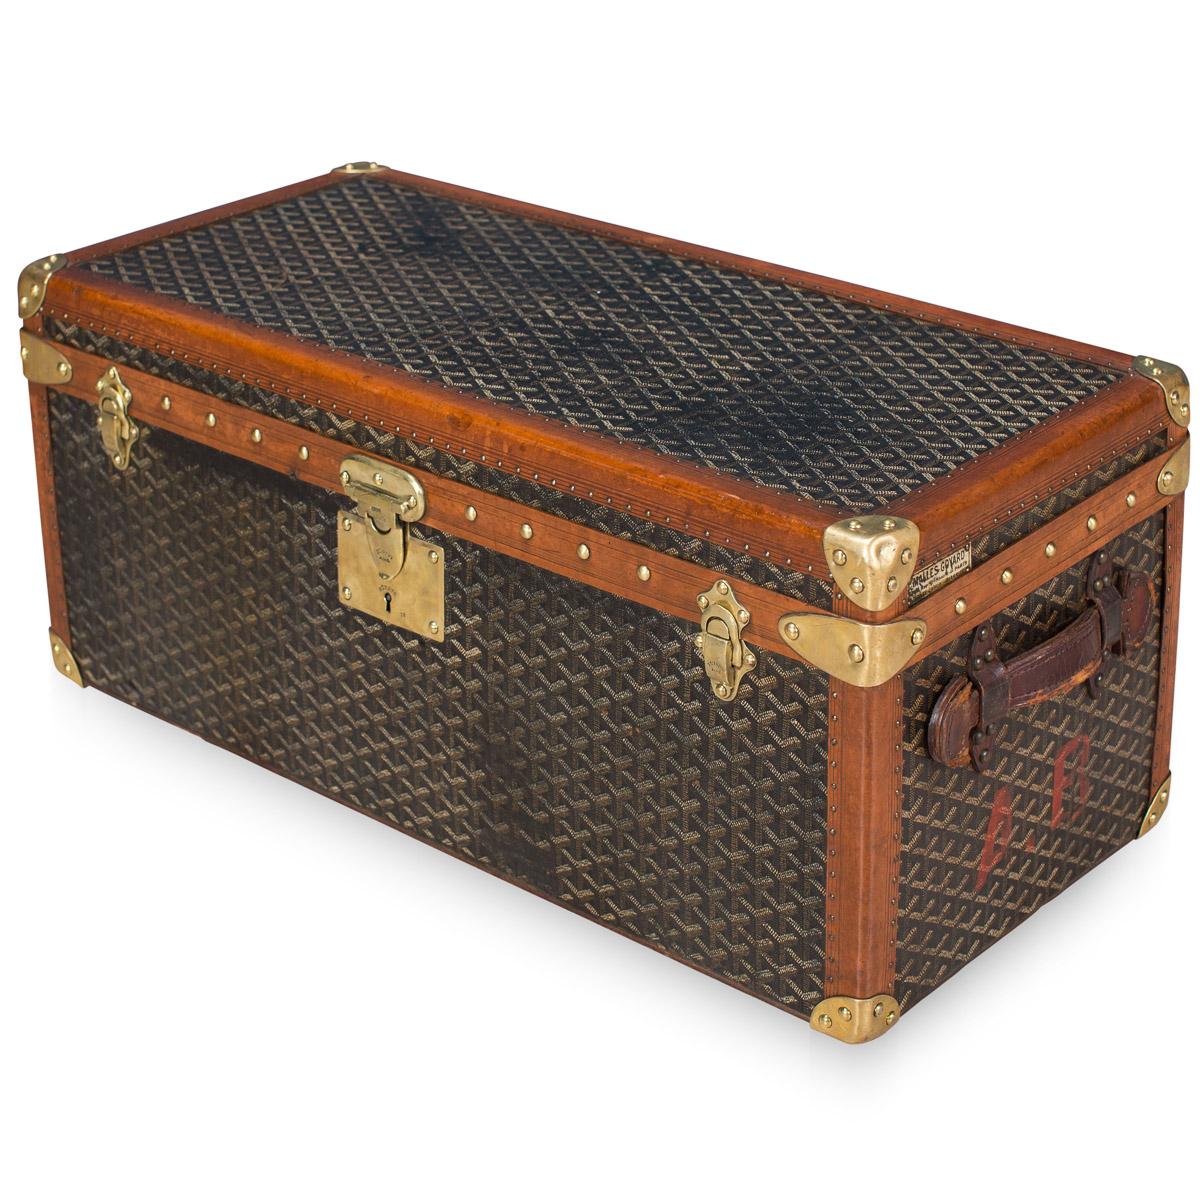 A very rare Goyard shoe trunk dating to the early part of the 20th century, circa 1900-1910. Over recent years the brand has been relaunched and has taken the world of fashion by storm. The original E. Goyard firm was a trunk maker which rivalled LV